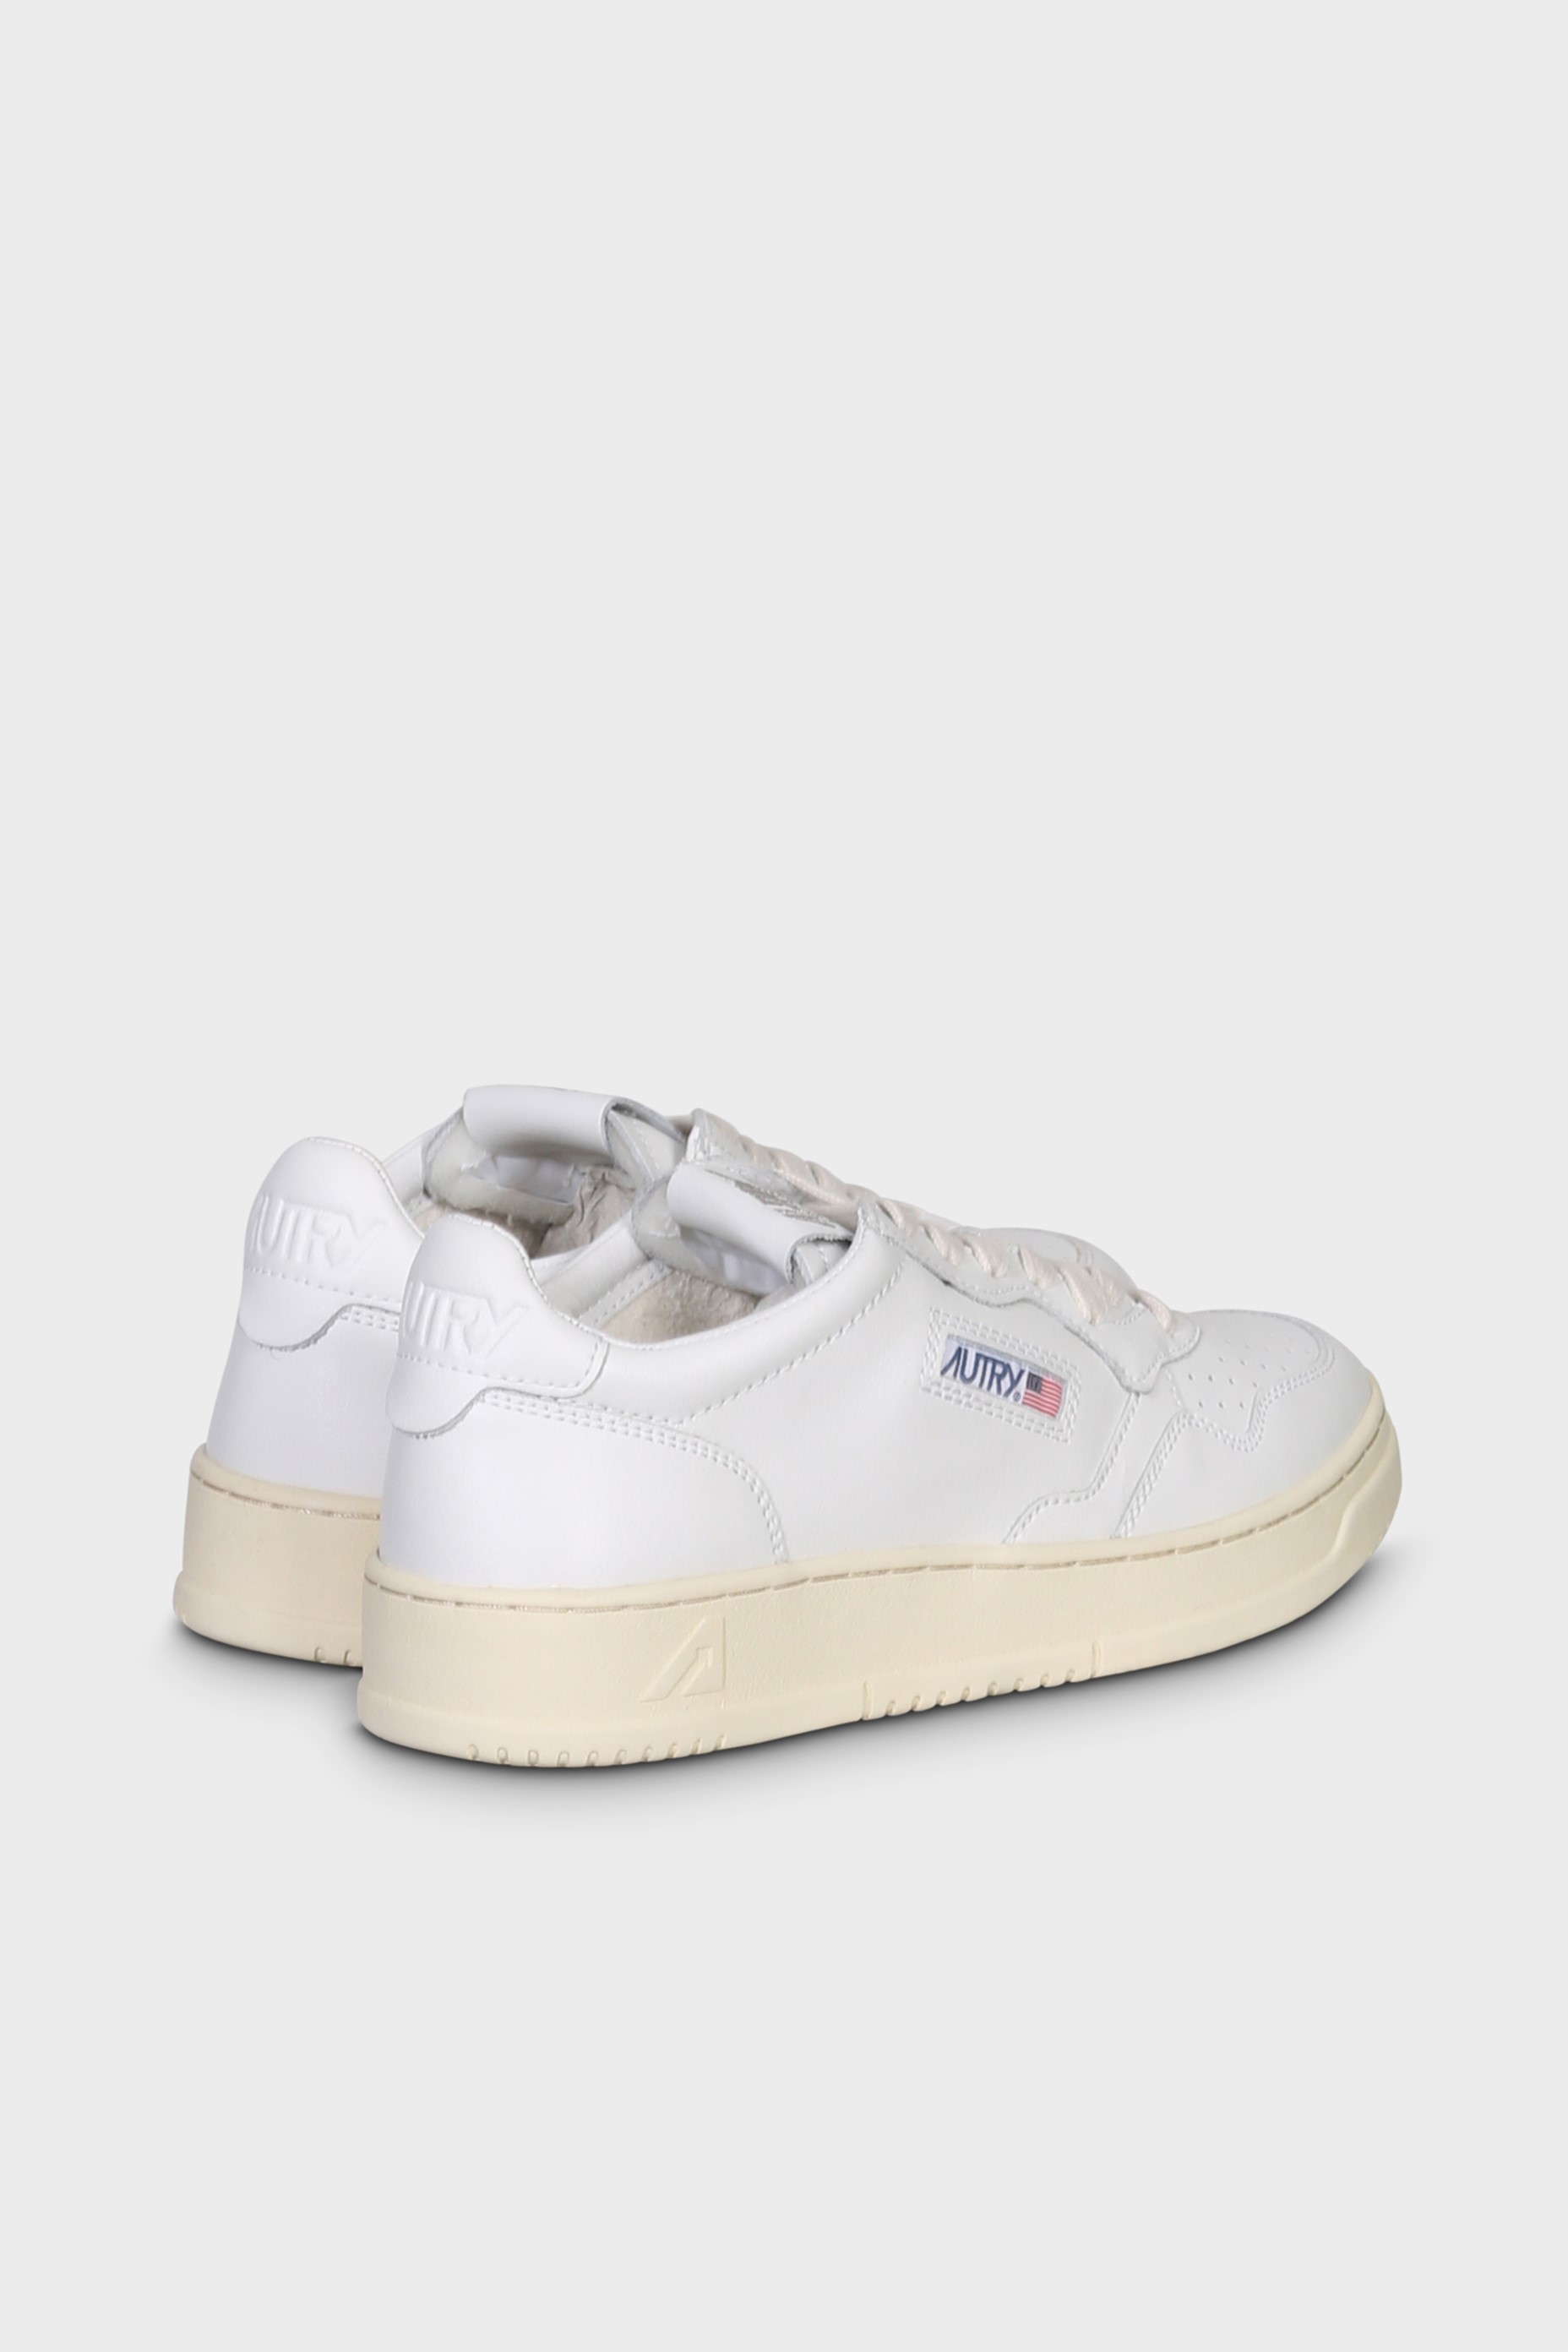 AUTRY ACTION SHOES Medalist Low Sneaker in White/White 36